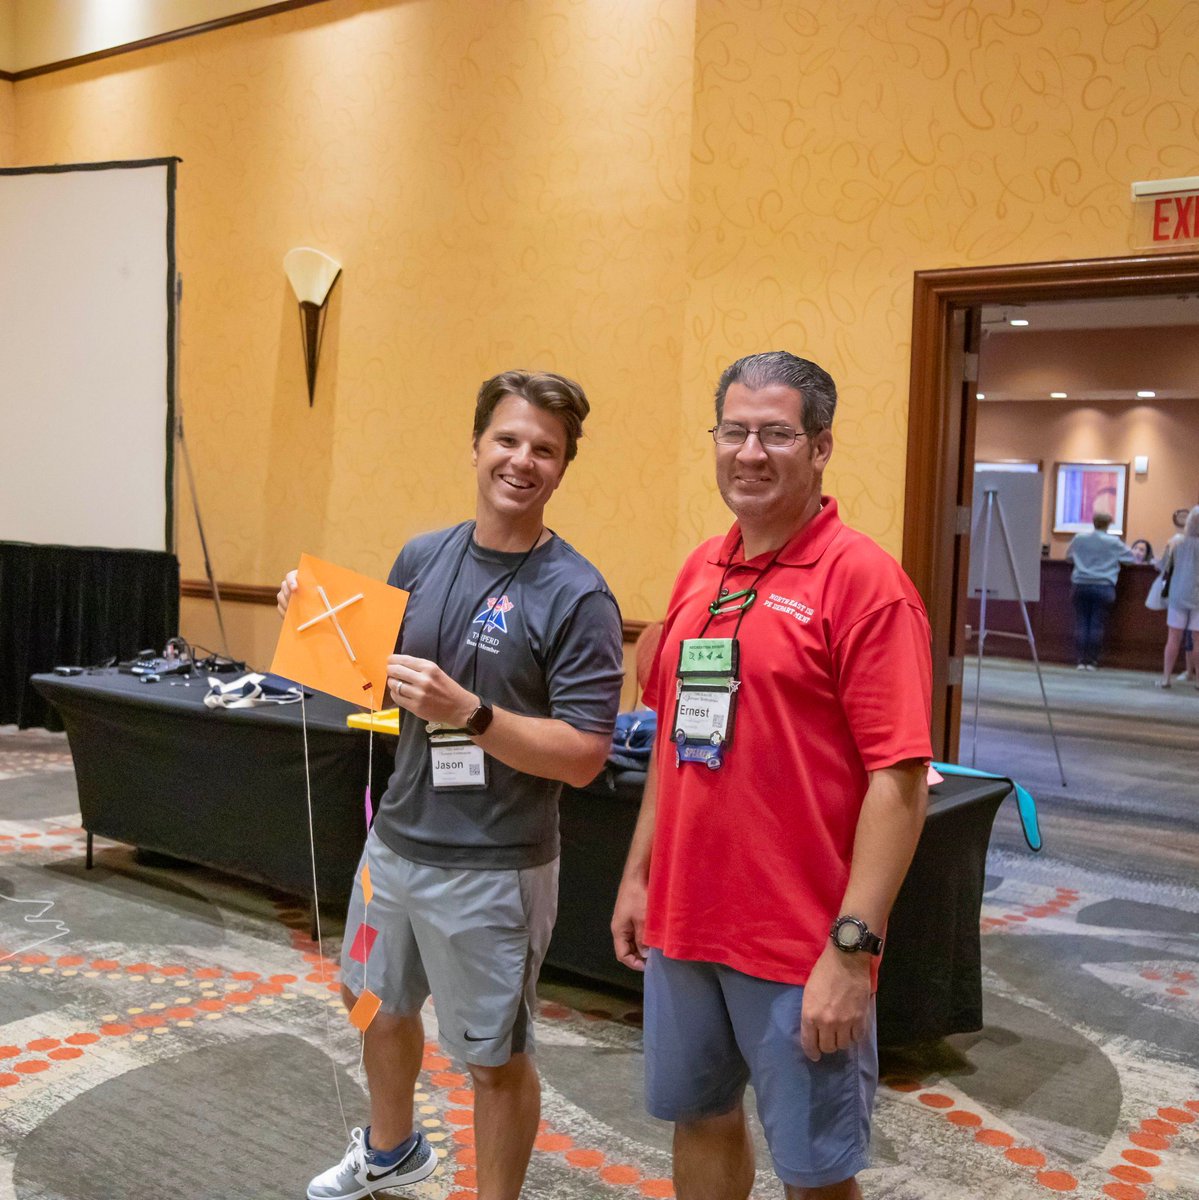 Don't miss out on - present at the 40th Annual Summer Conference! Submit your proposals online by 2/15/24 and connect with professionals, learn from experts, and share your knowledge and experiences. Join us in Frisco from July 14-16, 2024. #SummerConference #PresentersWanted